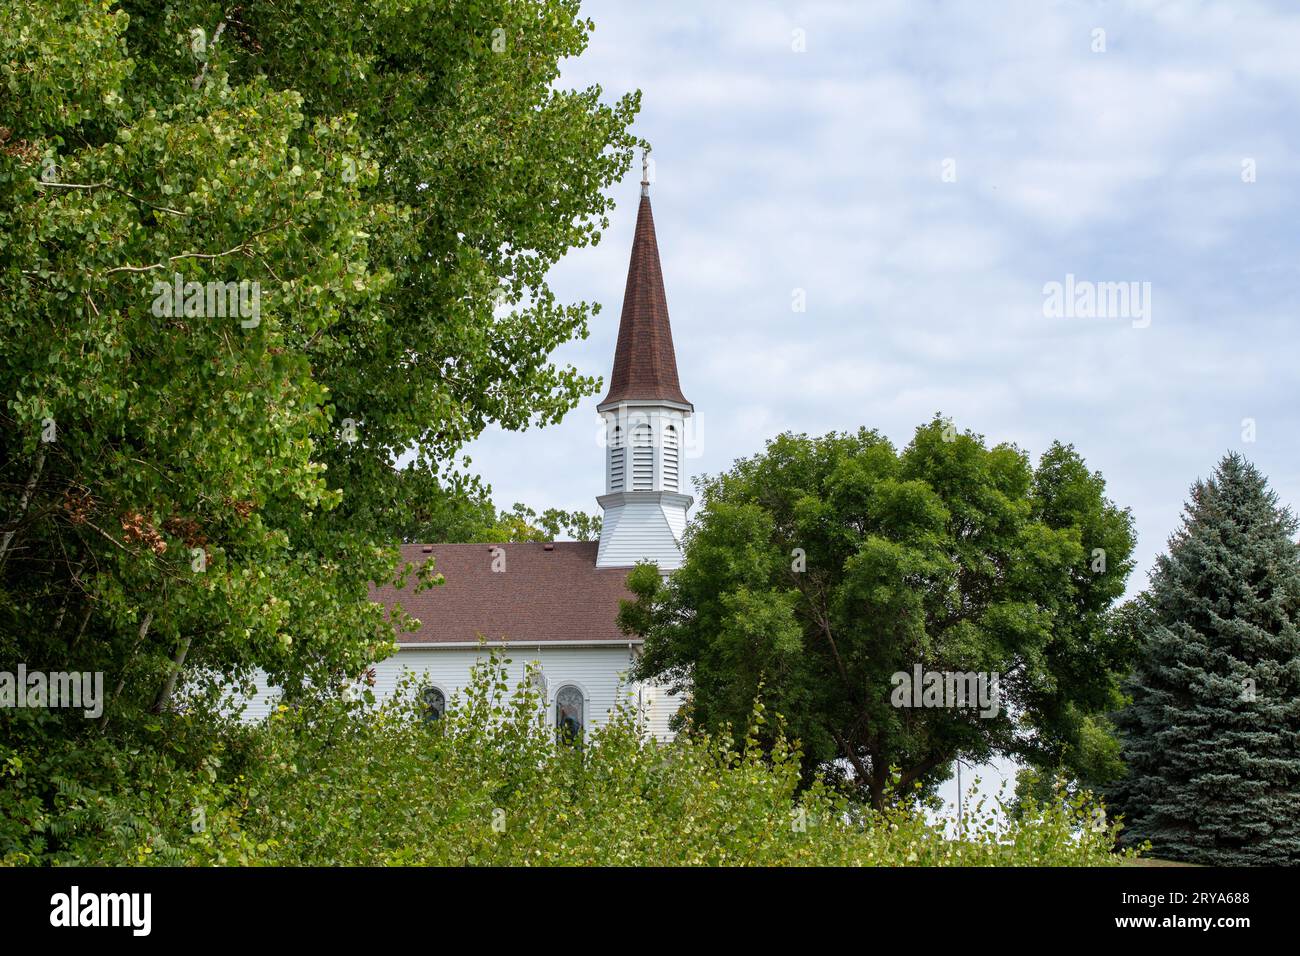 Landscape view of a picturesque old white wooden country church on a rural hillside Stock Photo